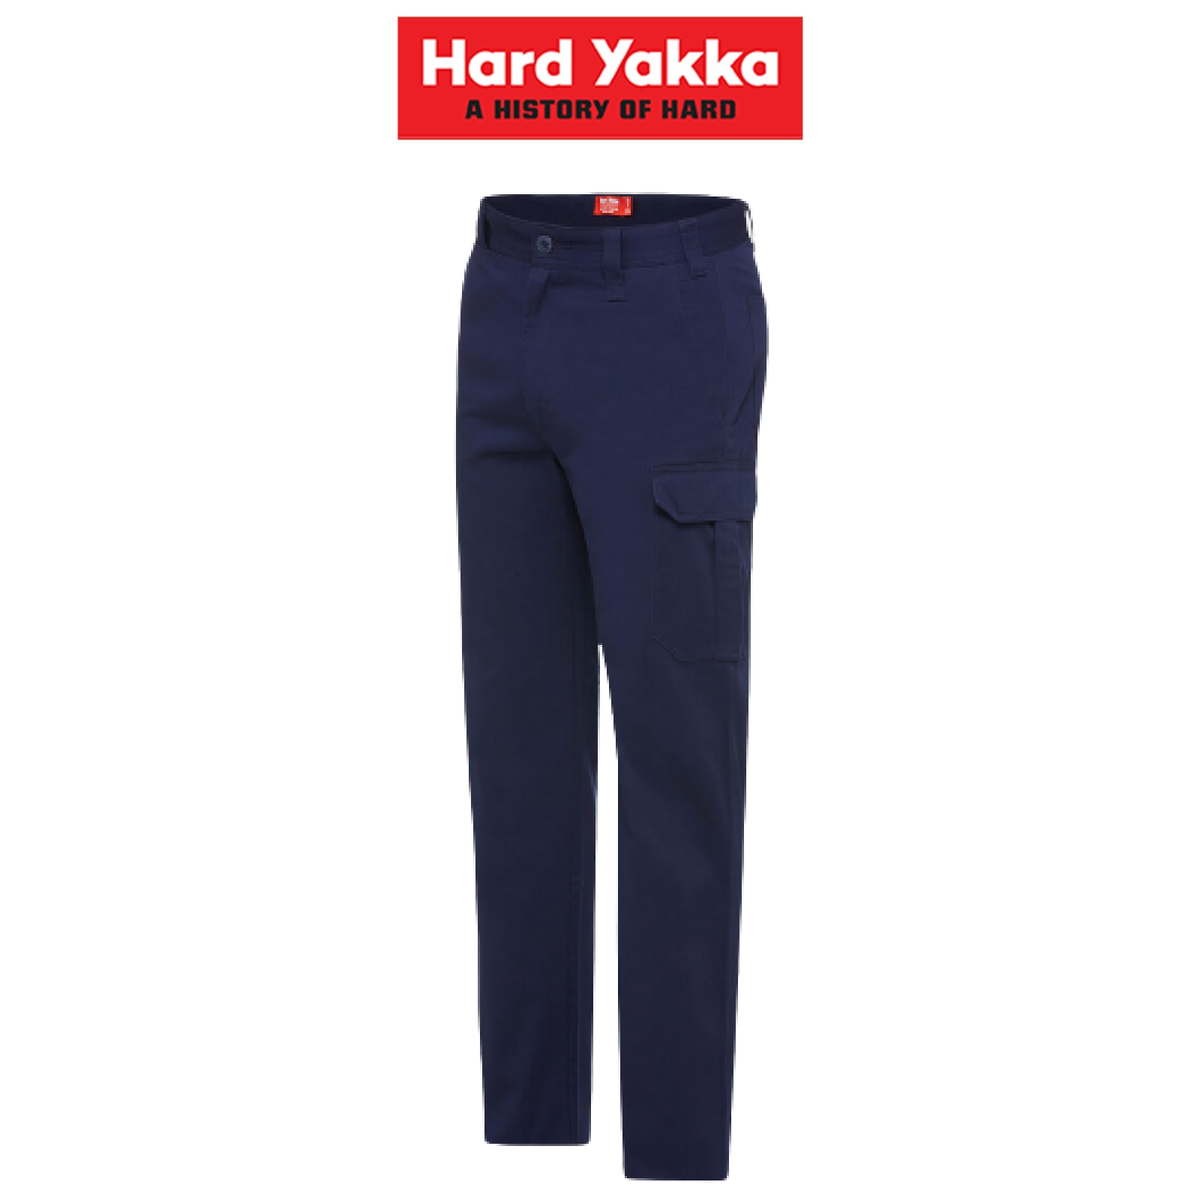 Hard Yakka Womens Cargo Relaxed Work Safety Cotton Drill Pants Comfort Y08381